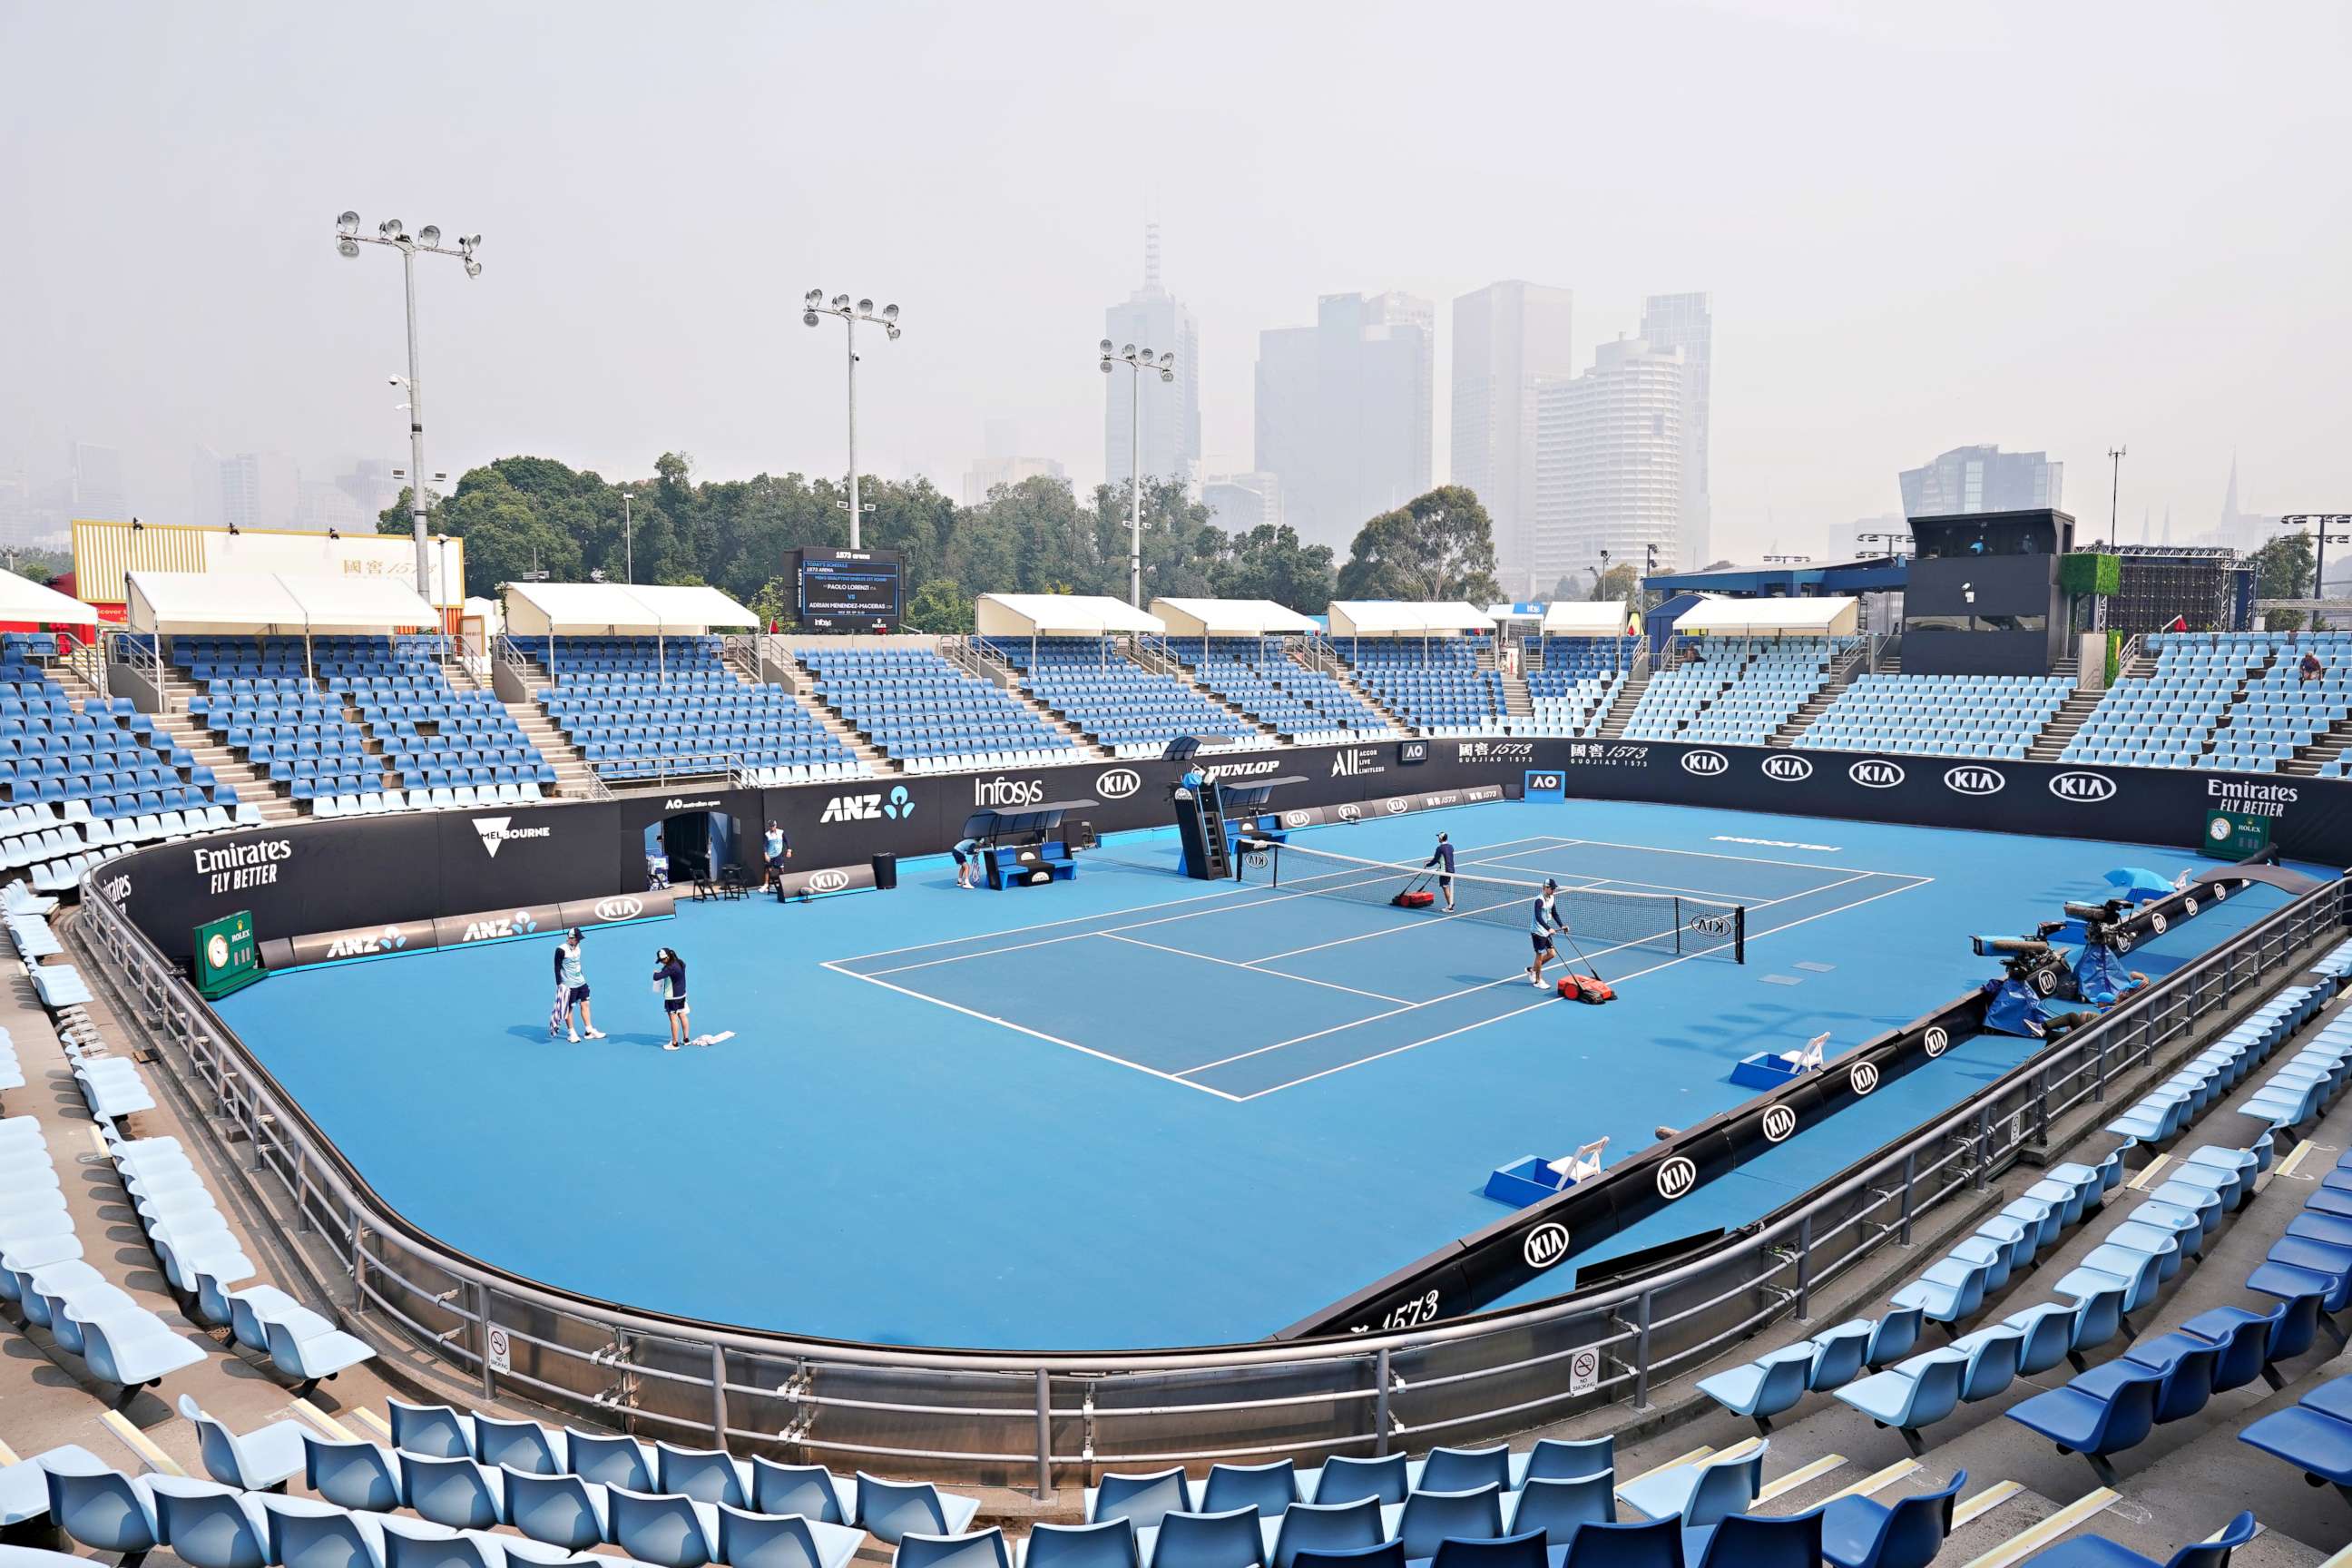 PHOTO: The city skyline is shrouded by smoke haze from bushfires during an Australian Open practice session at Melbourne Park in Melbourne, Australia on Jan. 14, 2020.  